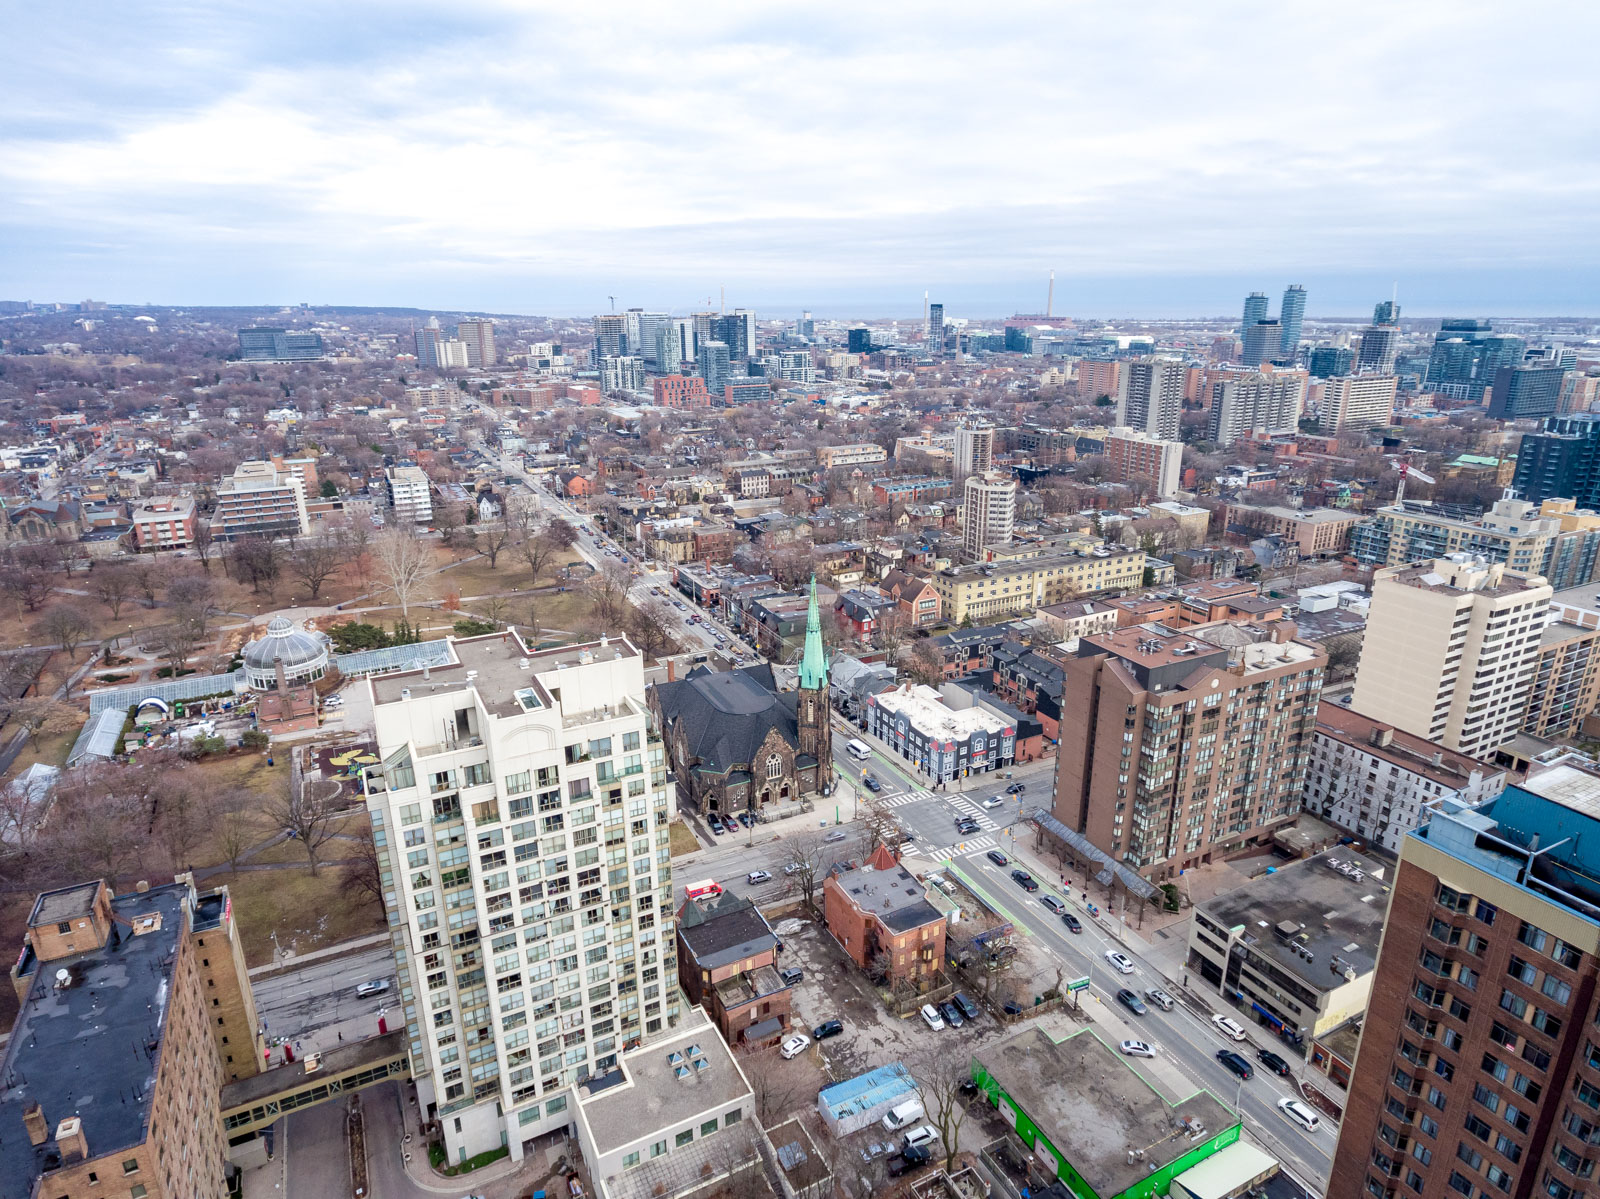 Aerial photo of 120 McGill St, parks and buildings.